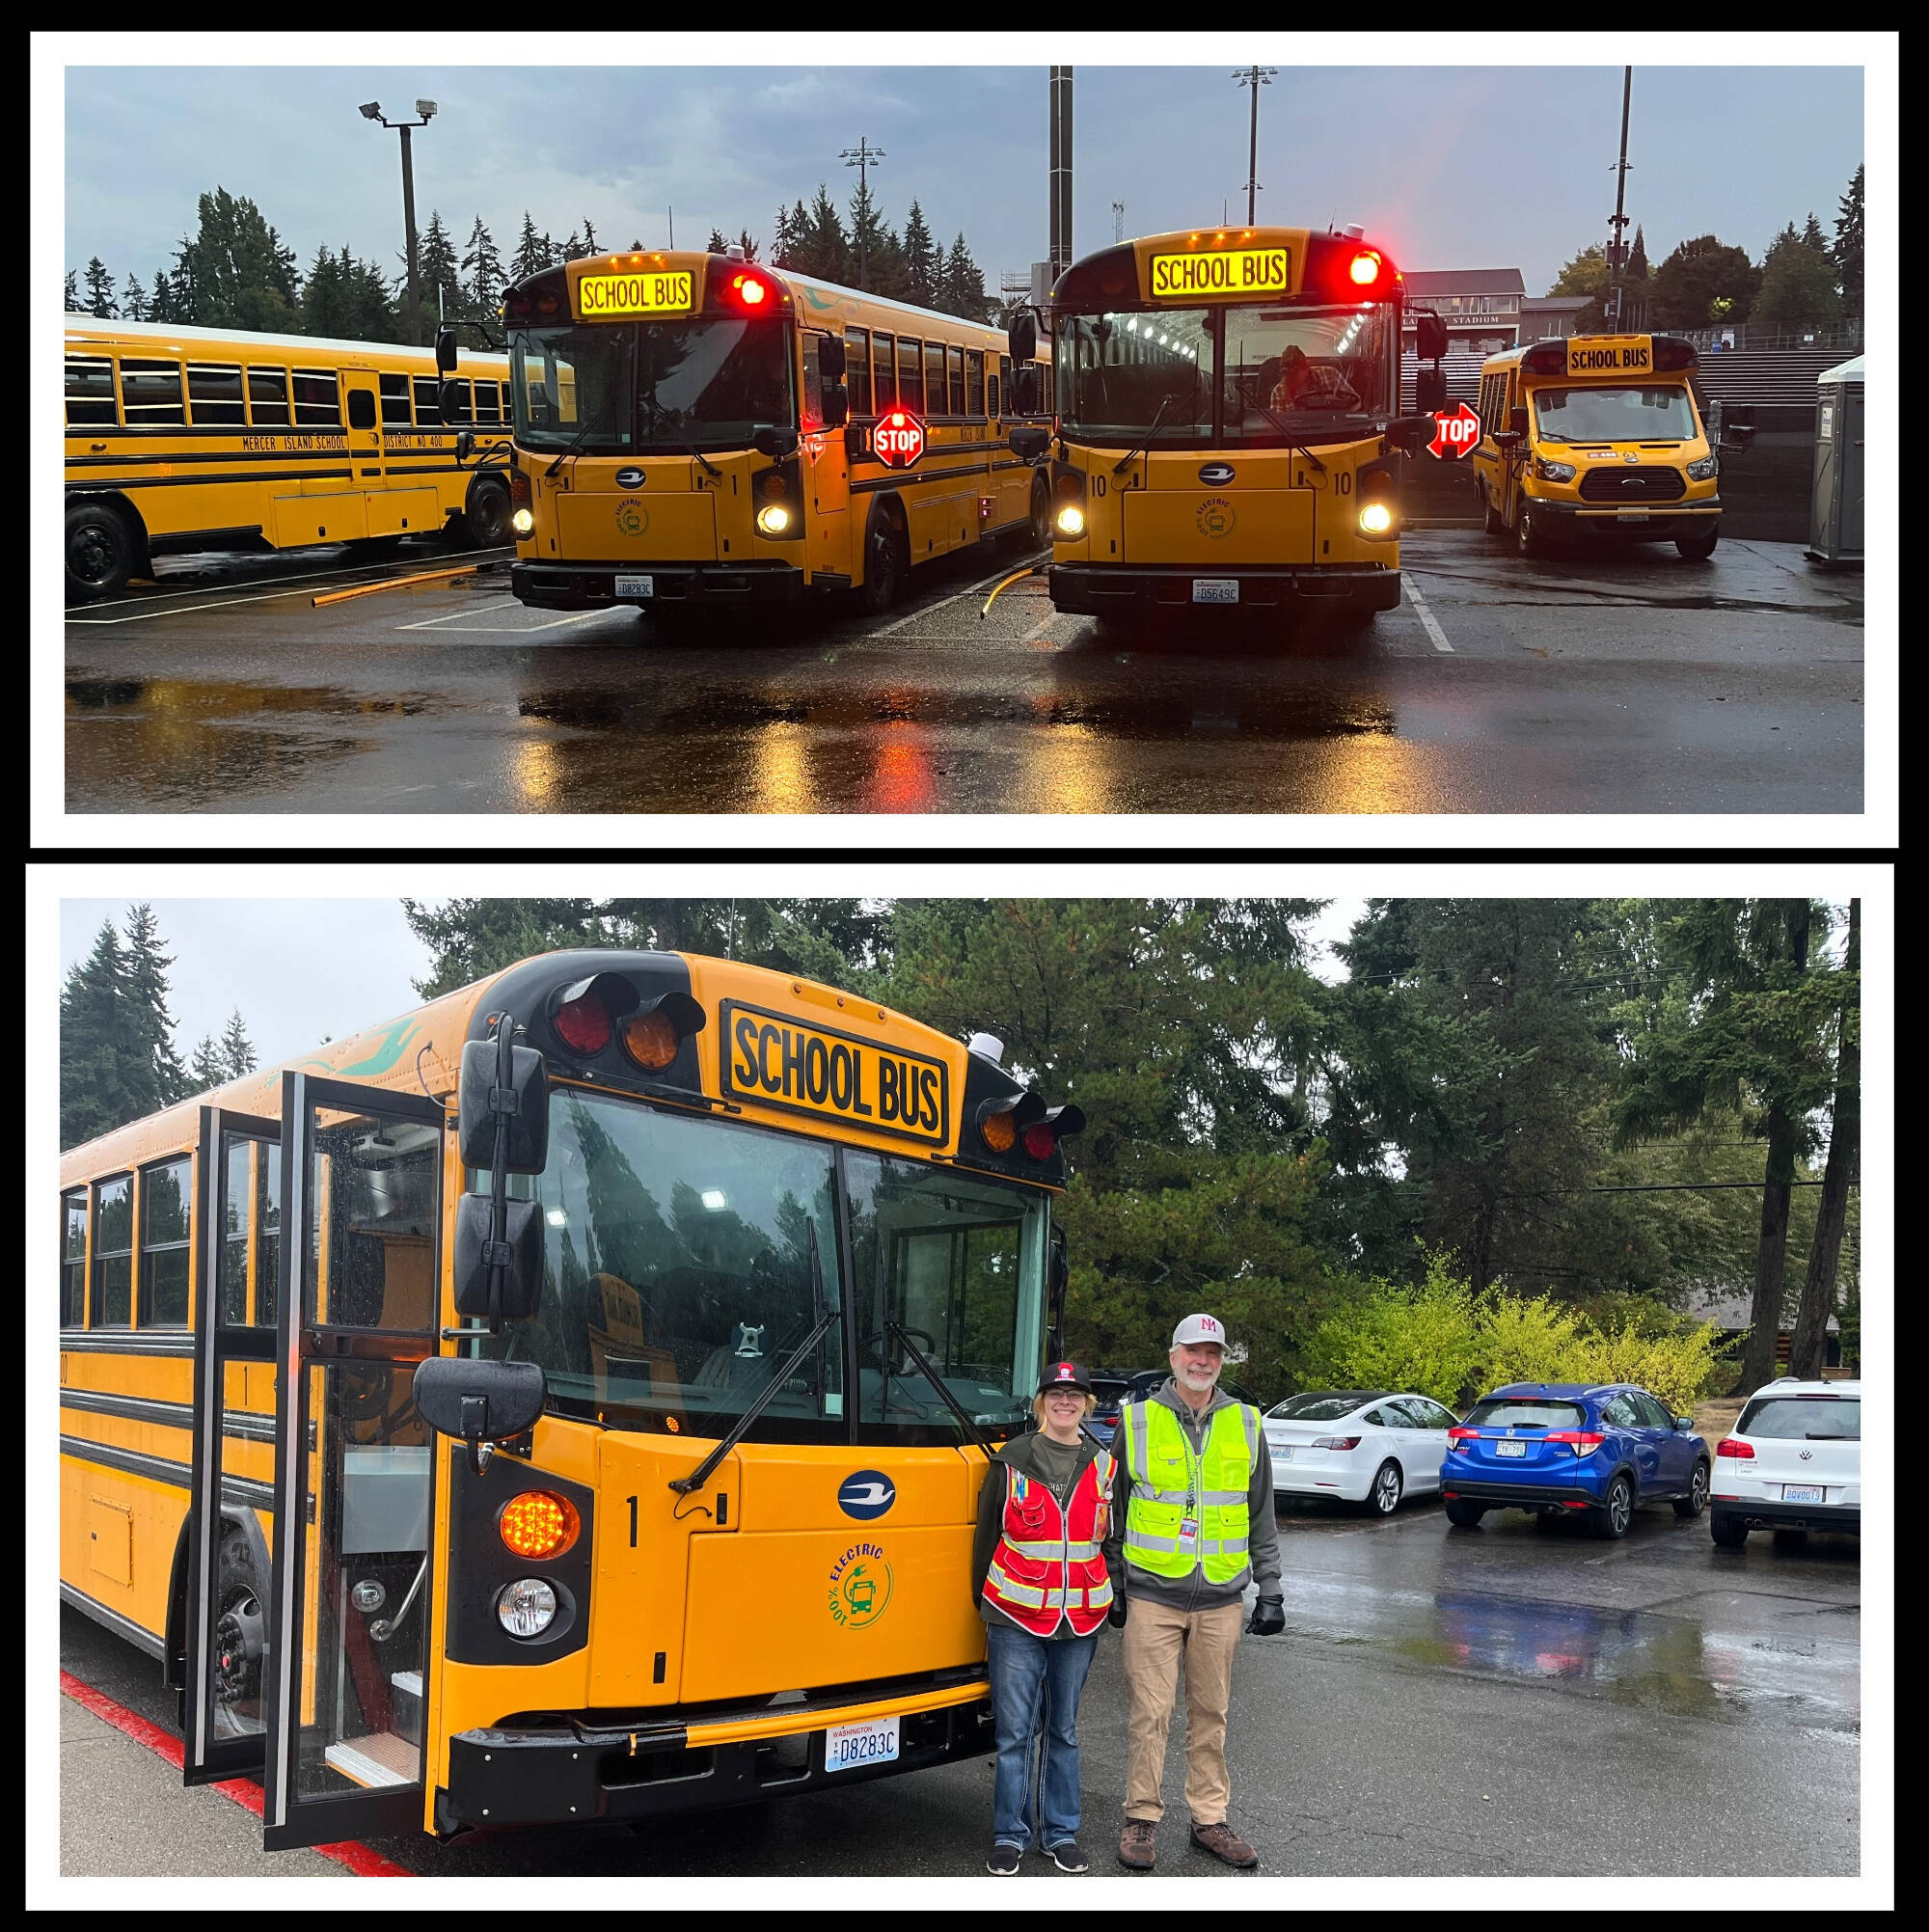 Mercer Island School District’s two electric buses ran their first routes on the morning of Sept. 25, with drivers transporting students to Mercer Island High School, Islander Middle School, and Lakeridge and West Mercer elementaries. Top, the buses prepare to get rolling. Bottom, Jo Simms (left) and Mo Youngs in front of one of the buses at Islander Middle School. Simms drove the pictured bus and Youngs drove the other one. They had just delivered students to the school. Photos courtesy of the Mercer Island School District